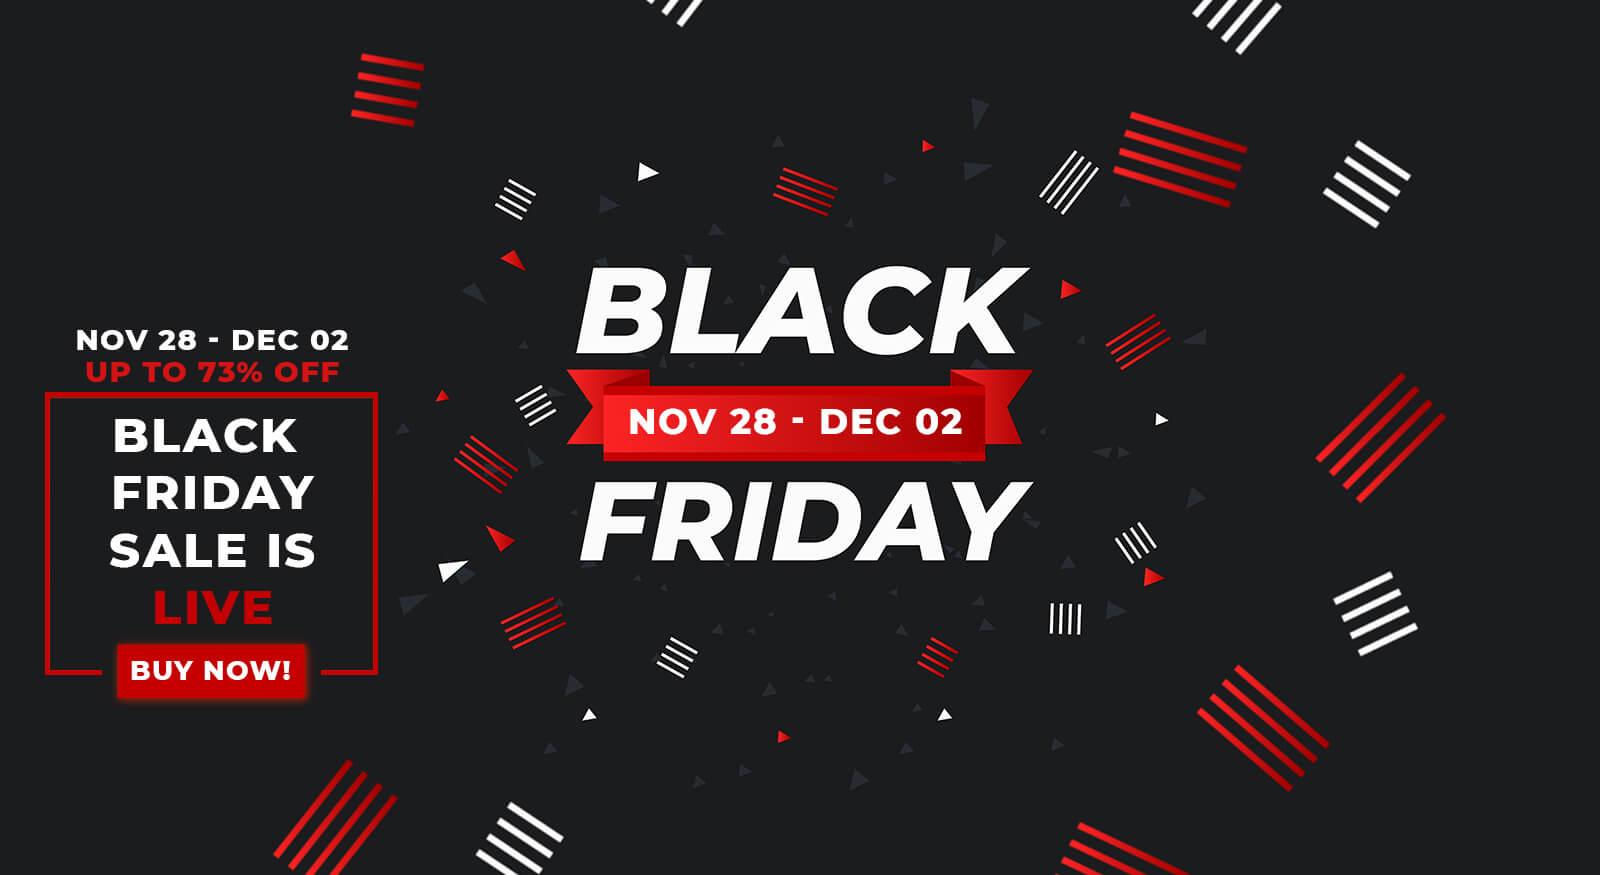 Black Friday Sale | Coming Soon | Mega Deals Up To 73% Off On Live Online Training And Classroom ...